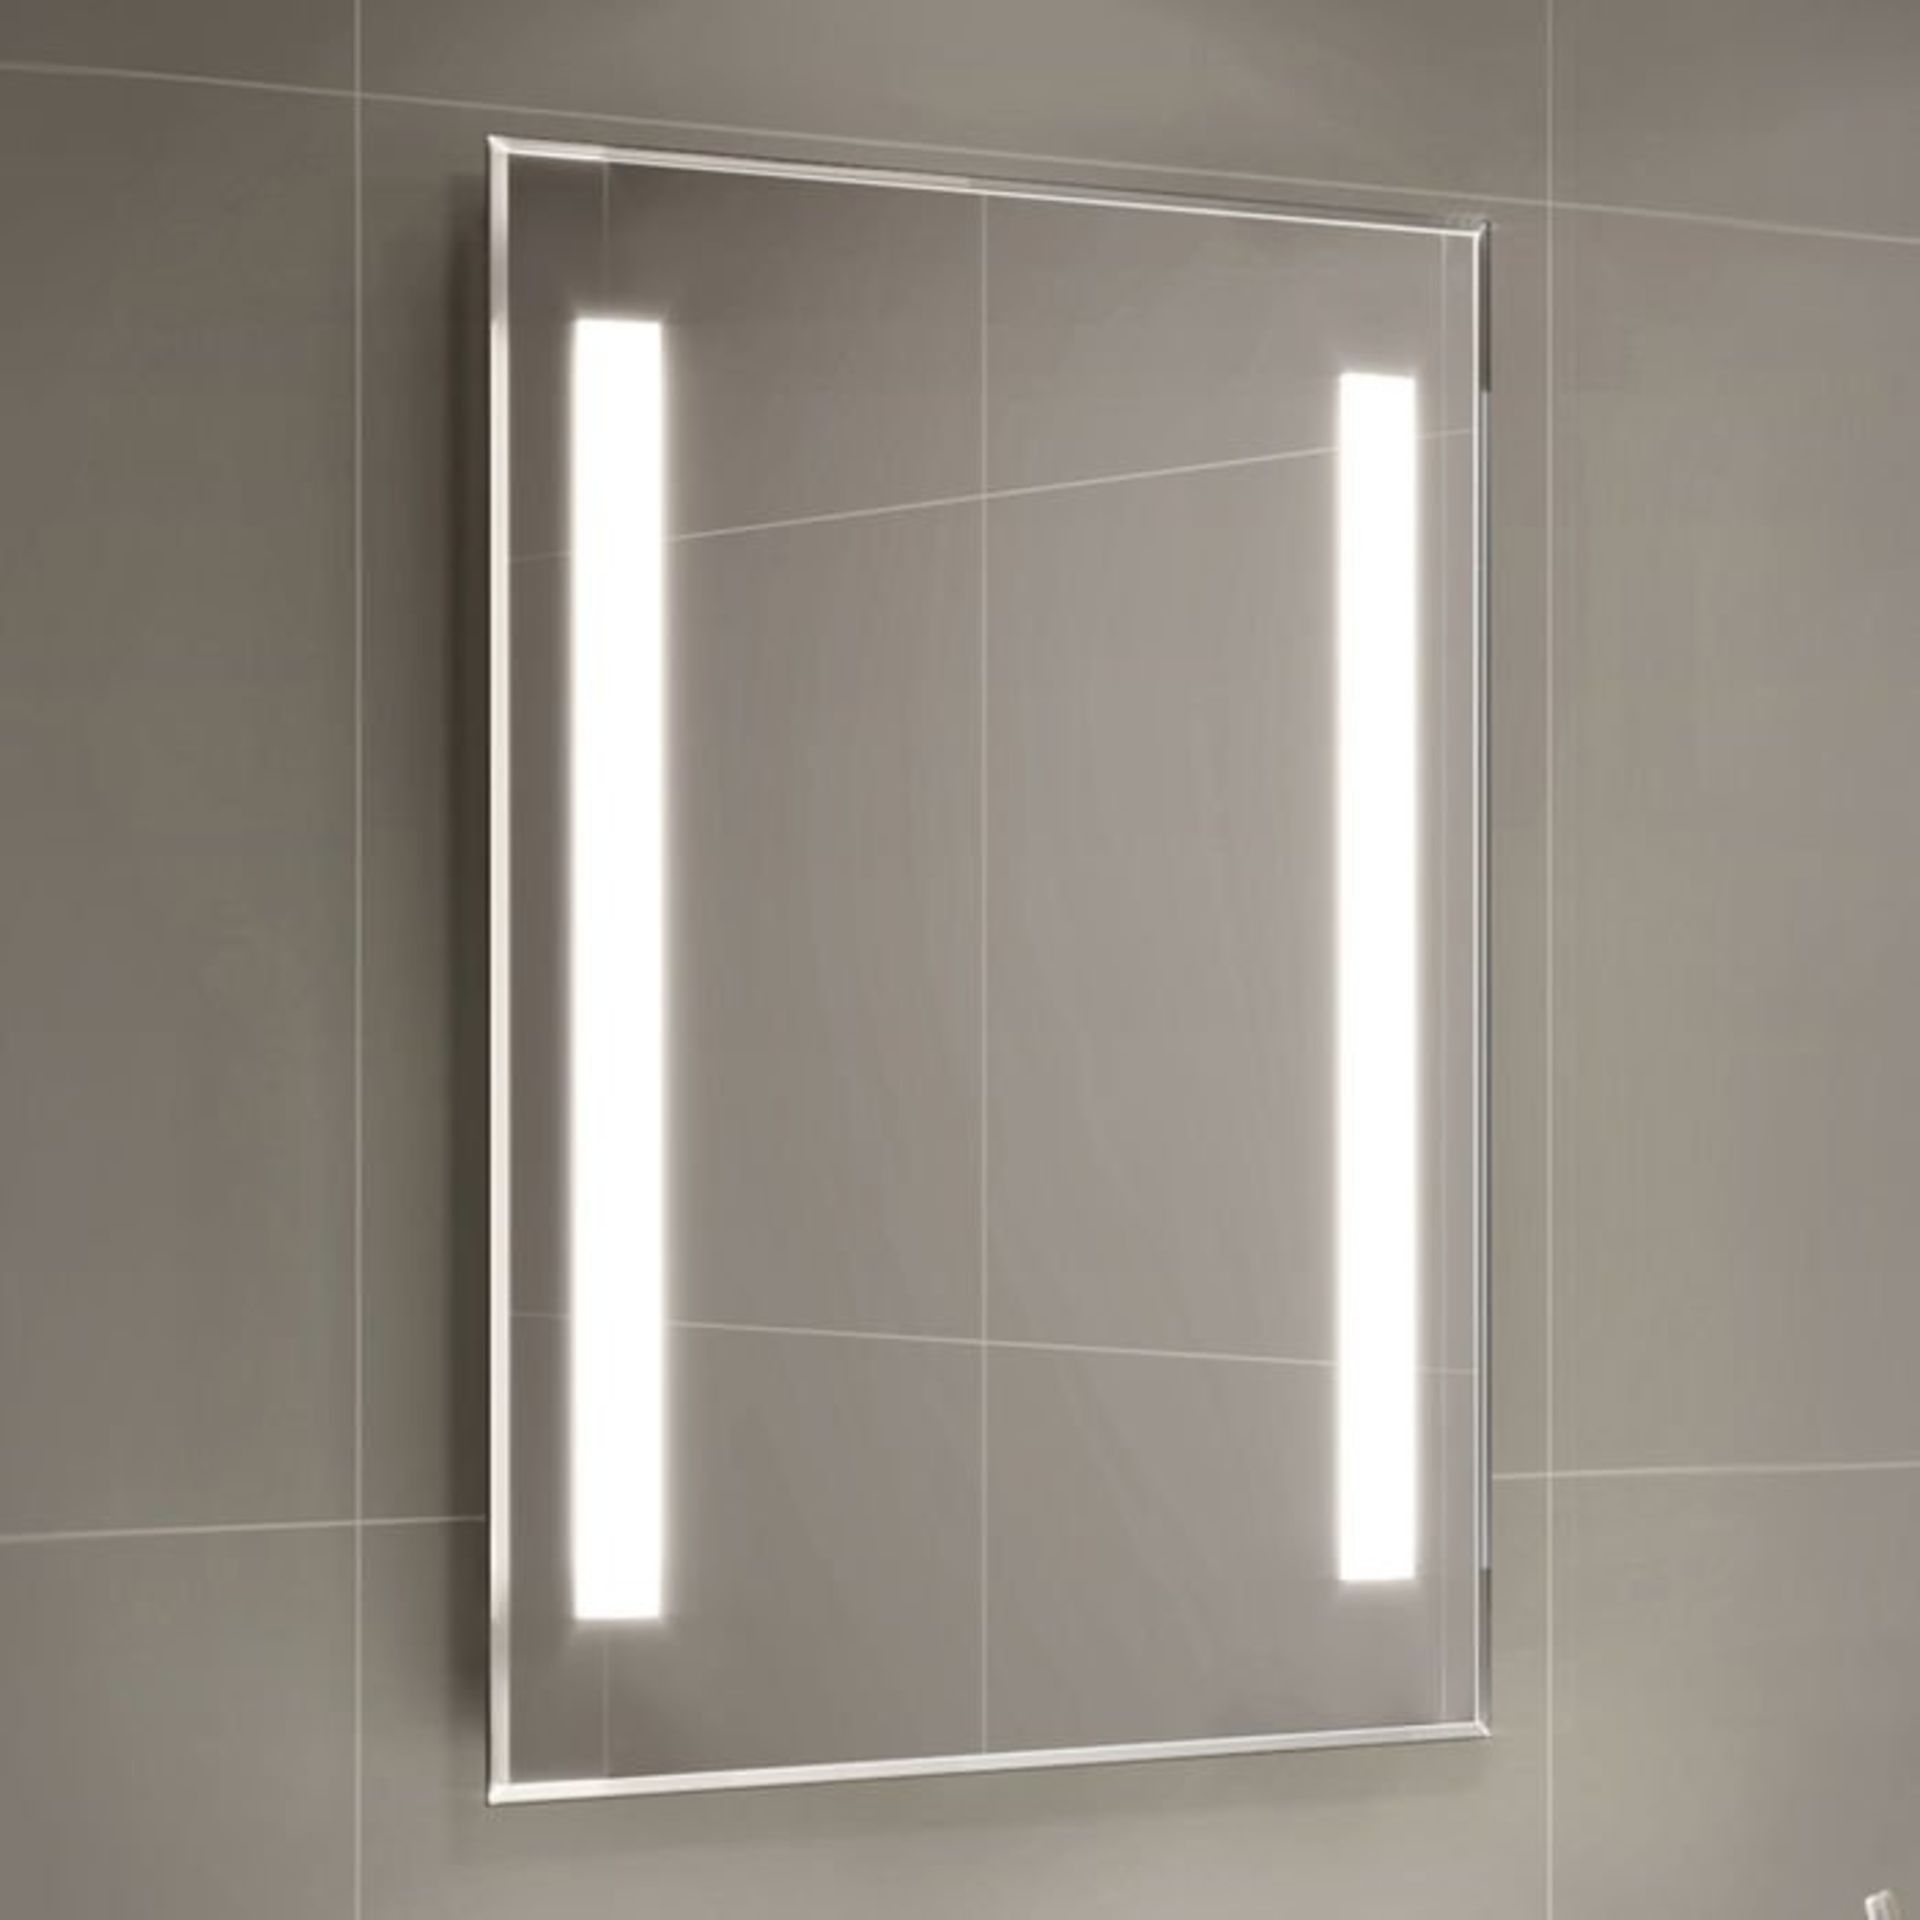 (L1) 500x700mm Omega Illuminated LED Mirror. RRP £349.99._x00D_Energy efficient LED lighting with